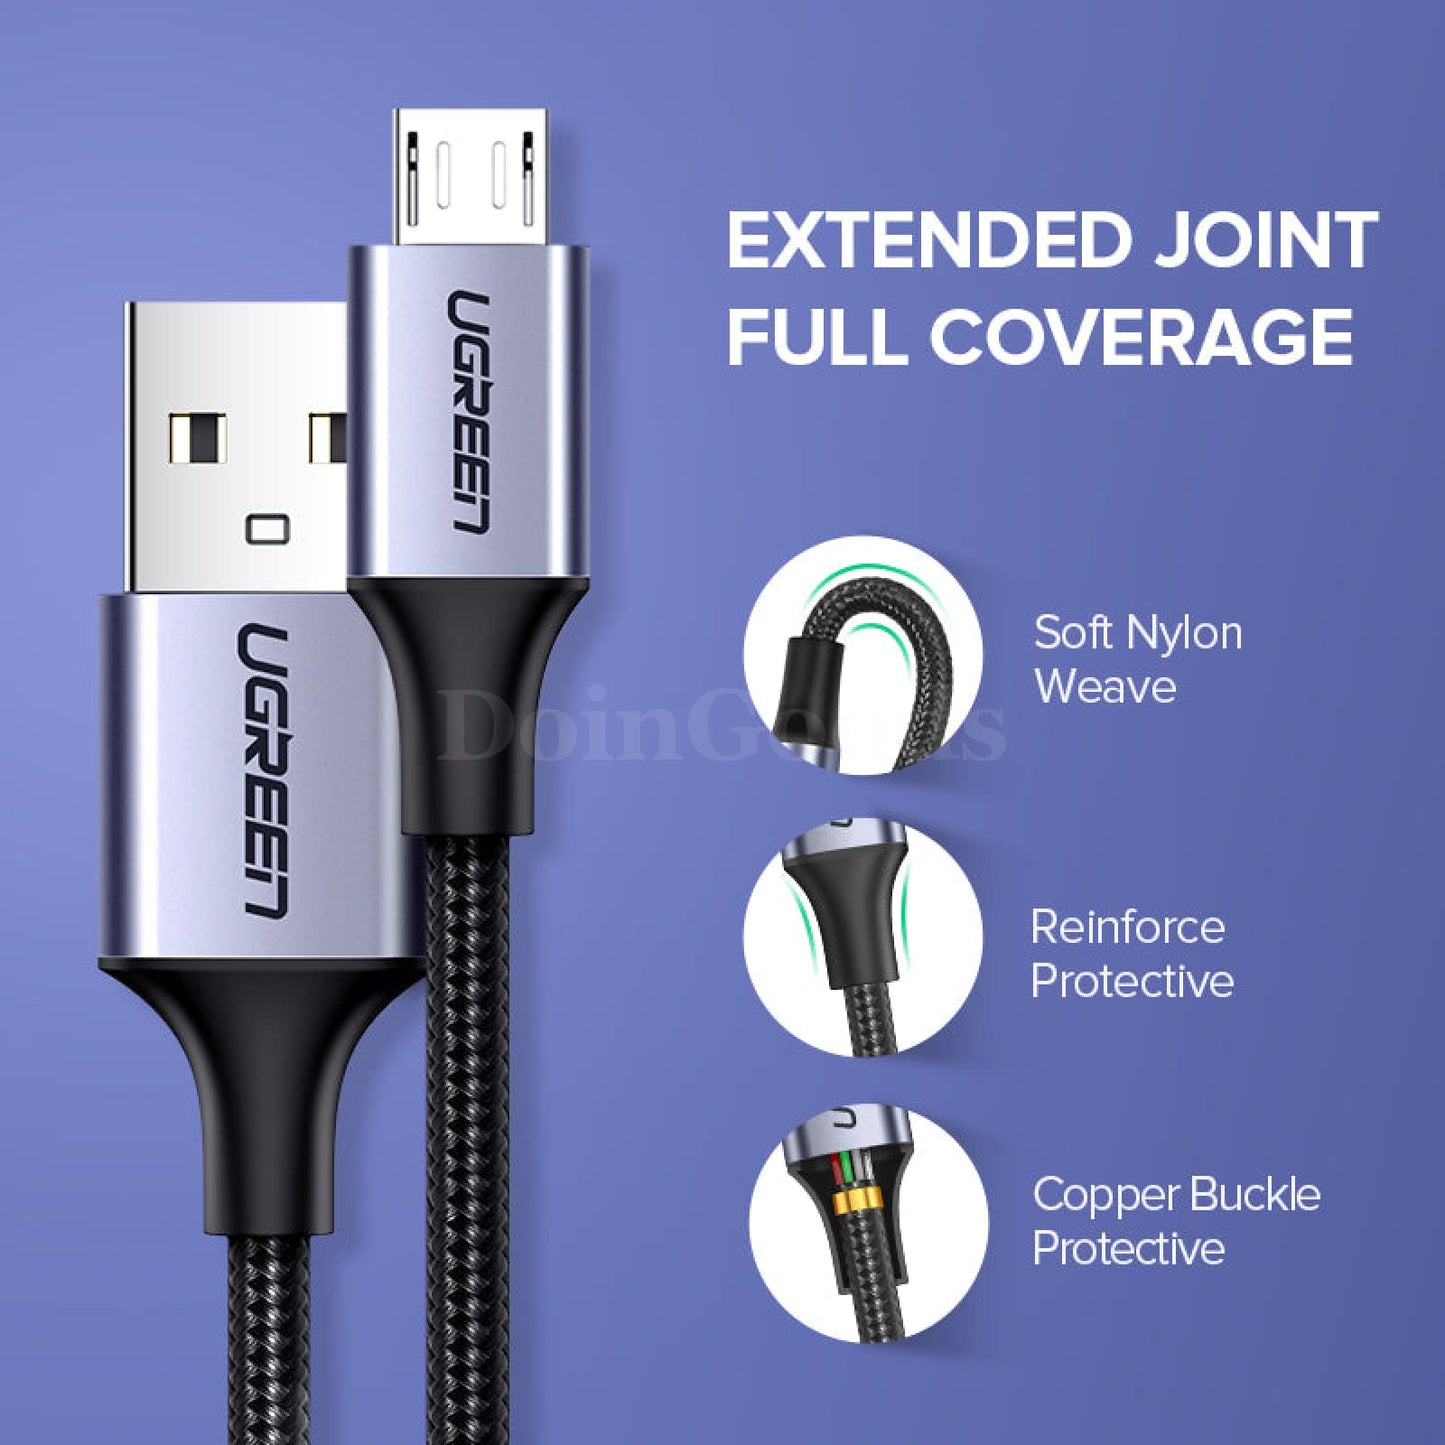 Ugreen Usb 2.0 A To Micro B Cable Charger Short Flexible Fast Charge High Speed 301635